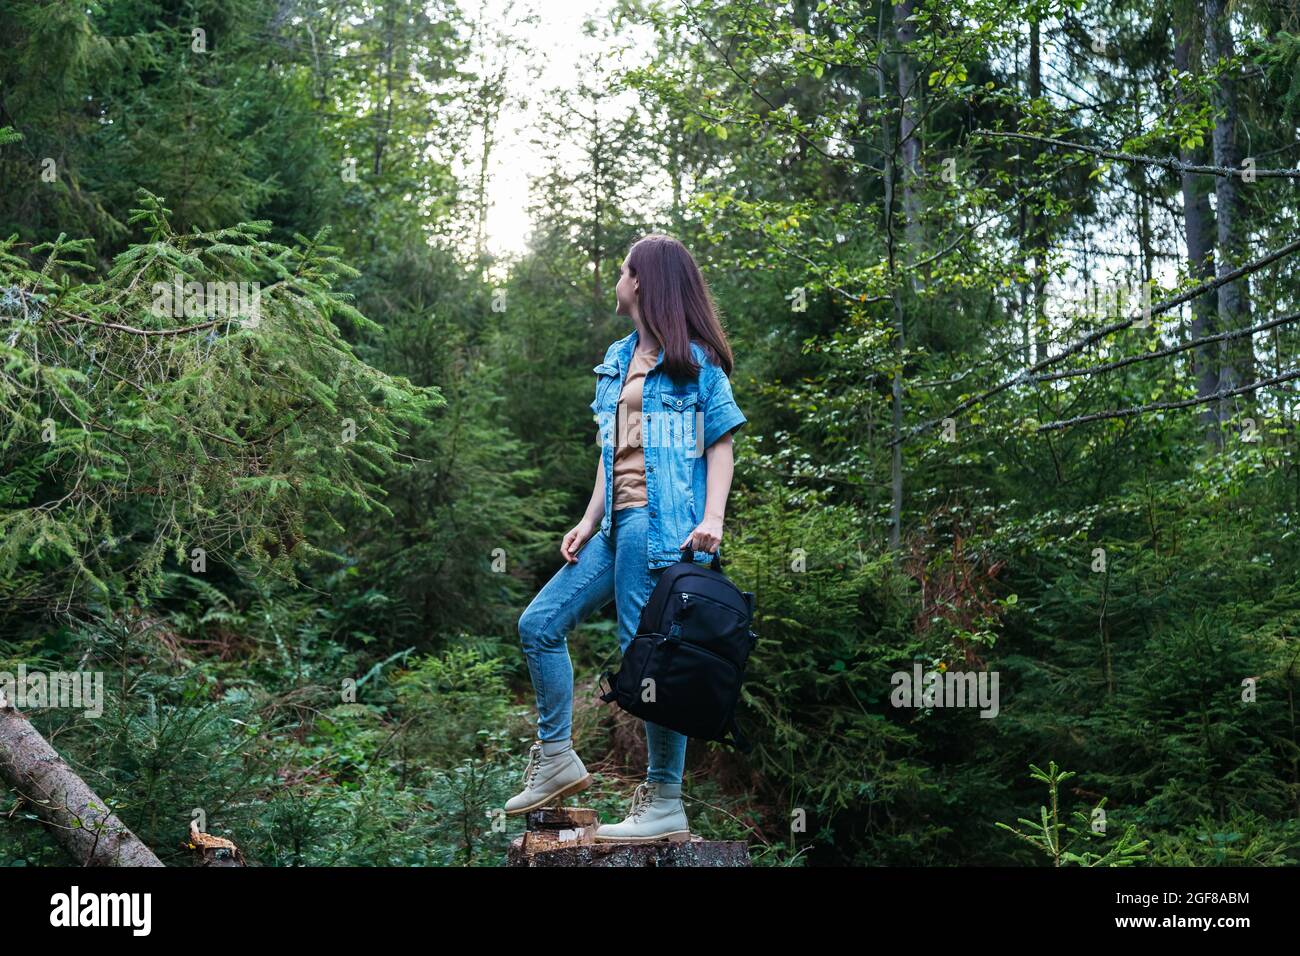 Woman in denim suit in boots with Photo backpack is engaged in hiking in forest. Unrecognizable caucasian young woman walking in nature in park Stock Photo